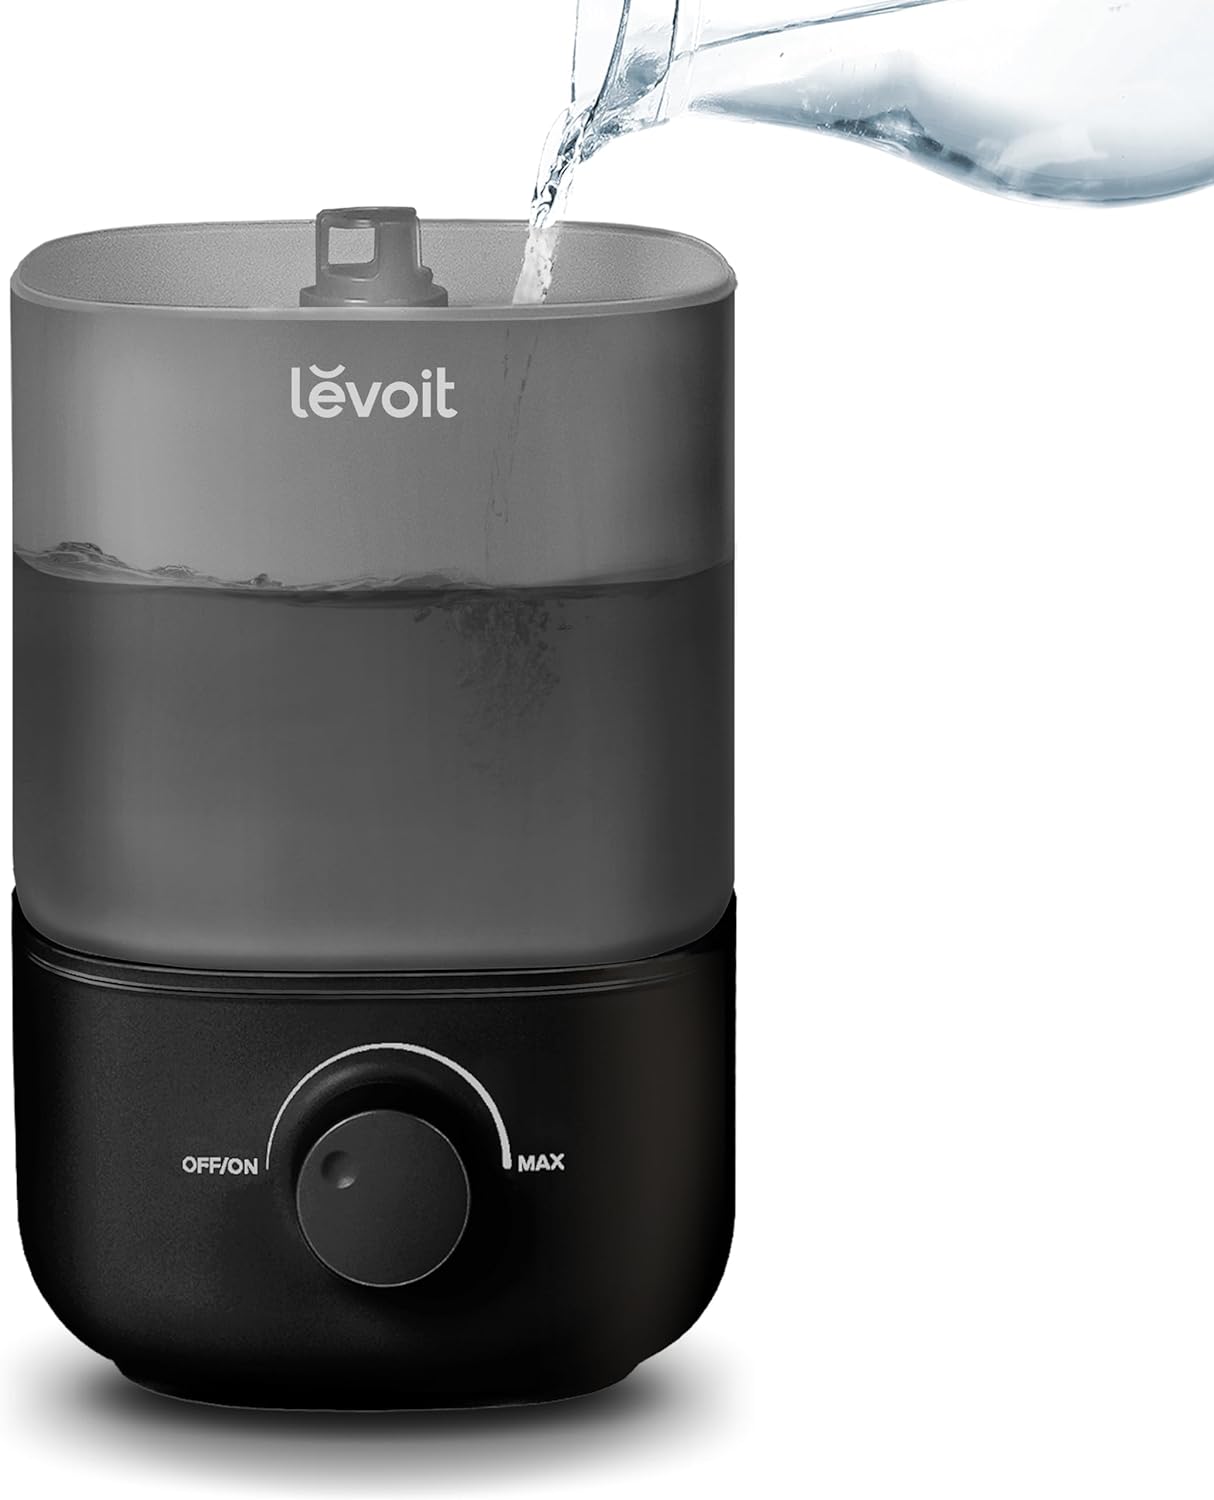 LEVOIT Classic 160 Top-Fill Ultrasonic Cool Mist Humidifier, Super Easy to Fill and Clean, Quiet Operation for Bedroom Home Baby & Plants, Auto Shut-off for Safety, 360 Rotating Nozzle, 2.5L, Black